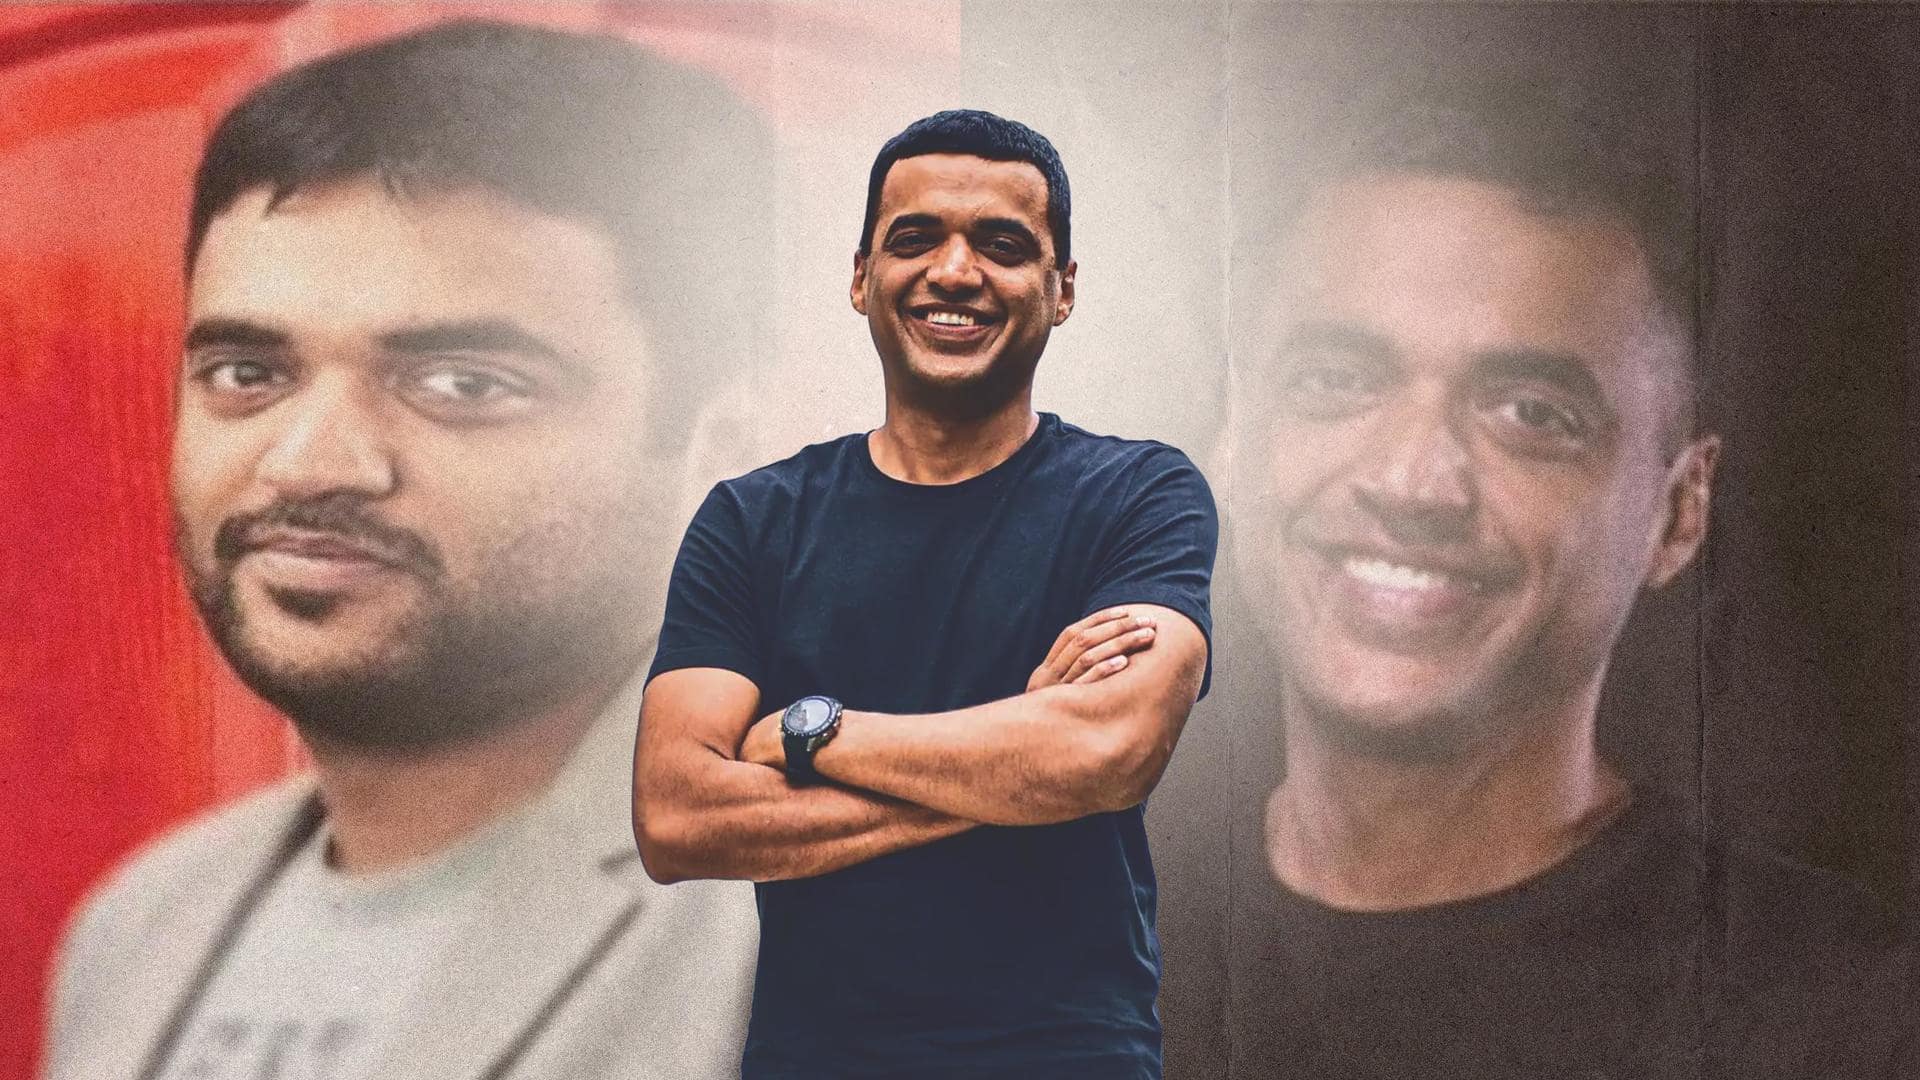 Zomato's Deepinder Goyal loses 15kg, here's how he did it